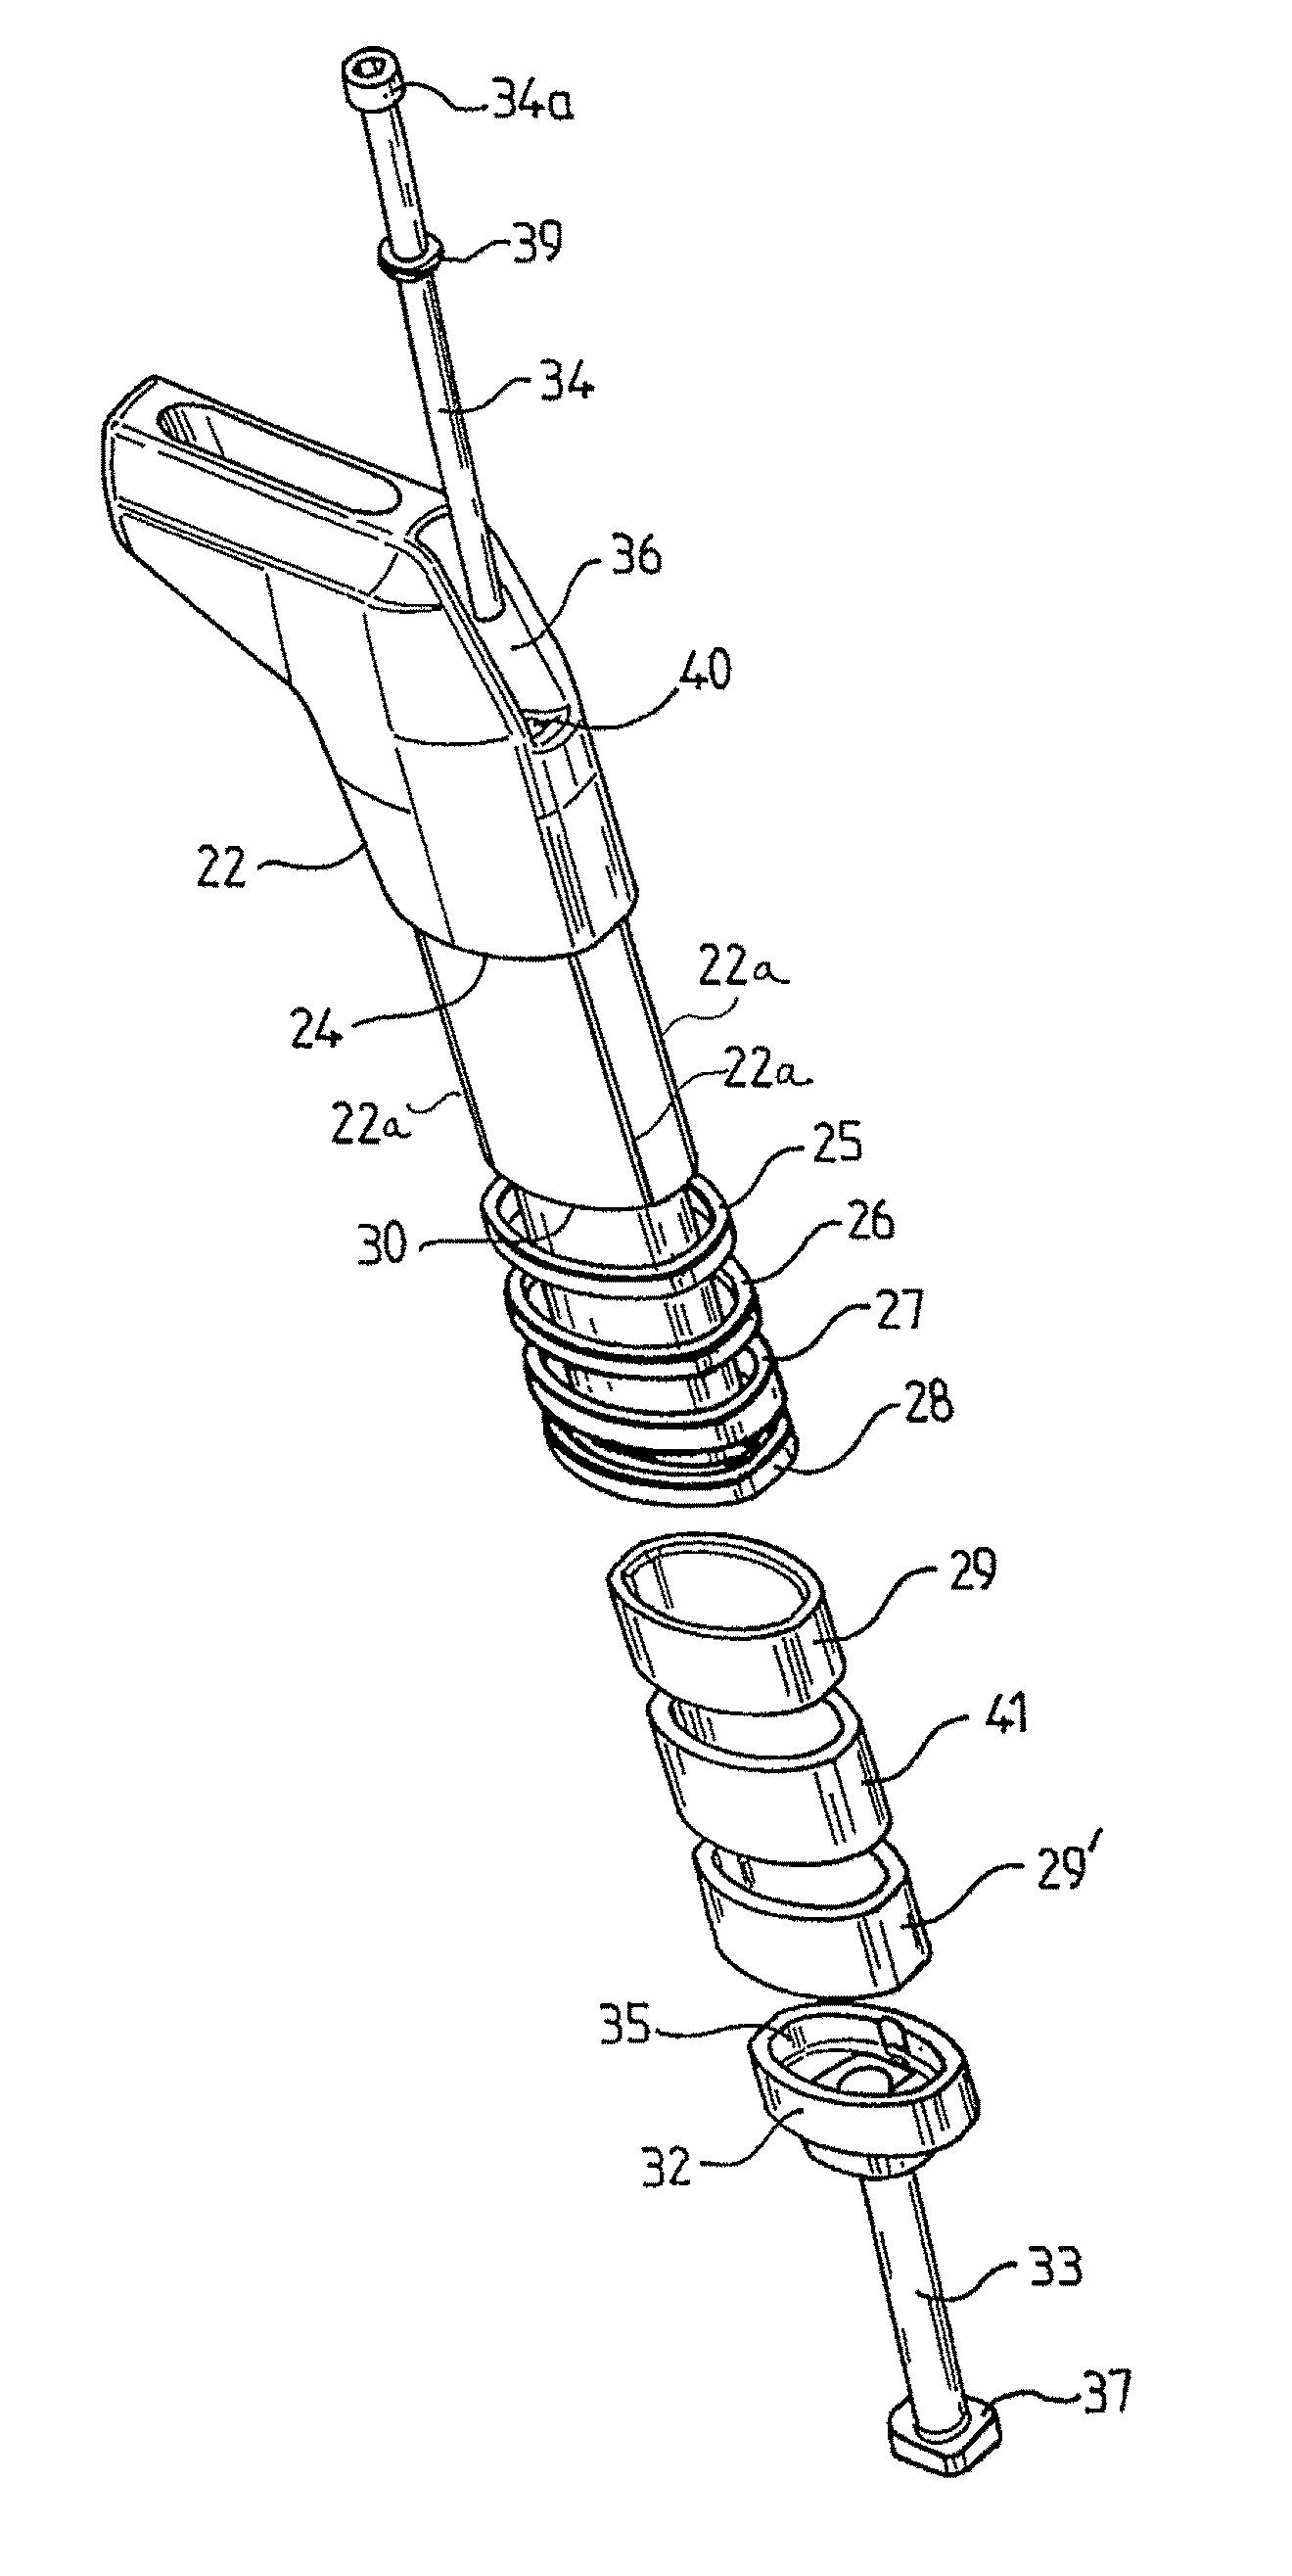 Saddle post supporting device